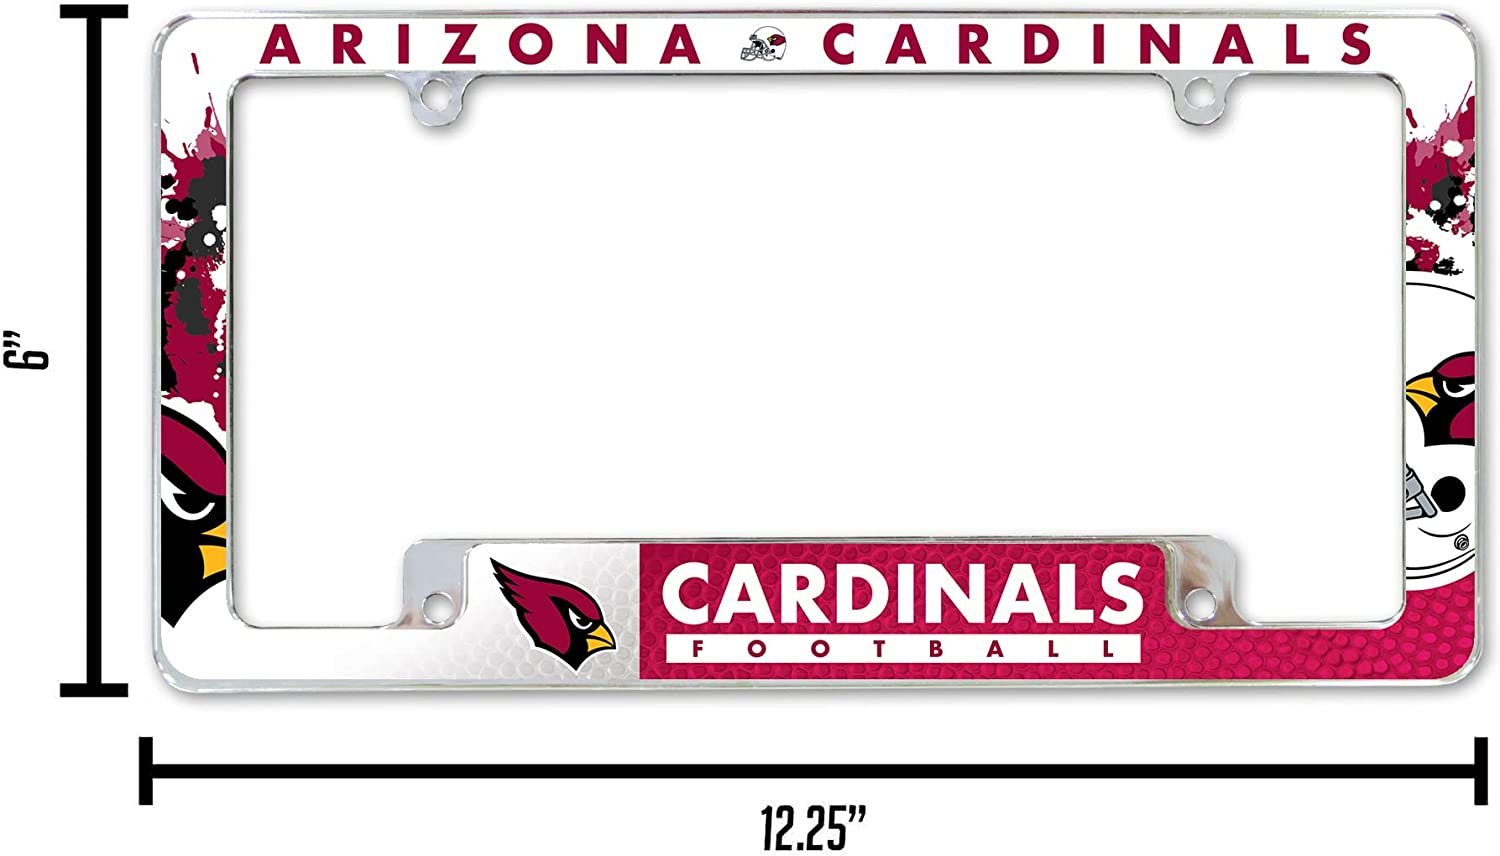 Arizona Cardinals Metal License License Plate Frame Tag Cover, All Over Design, 12x6 Inch